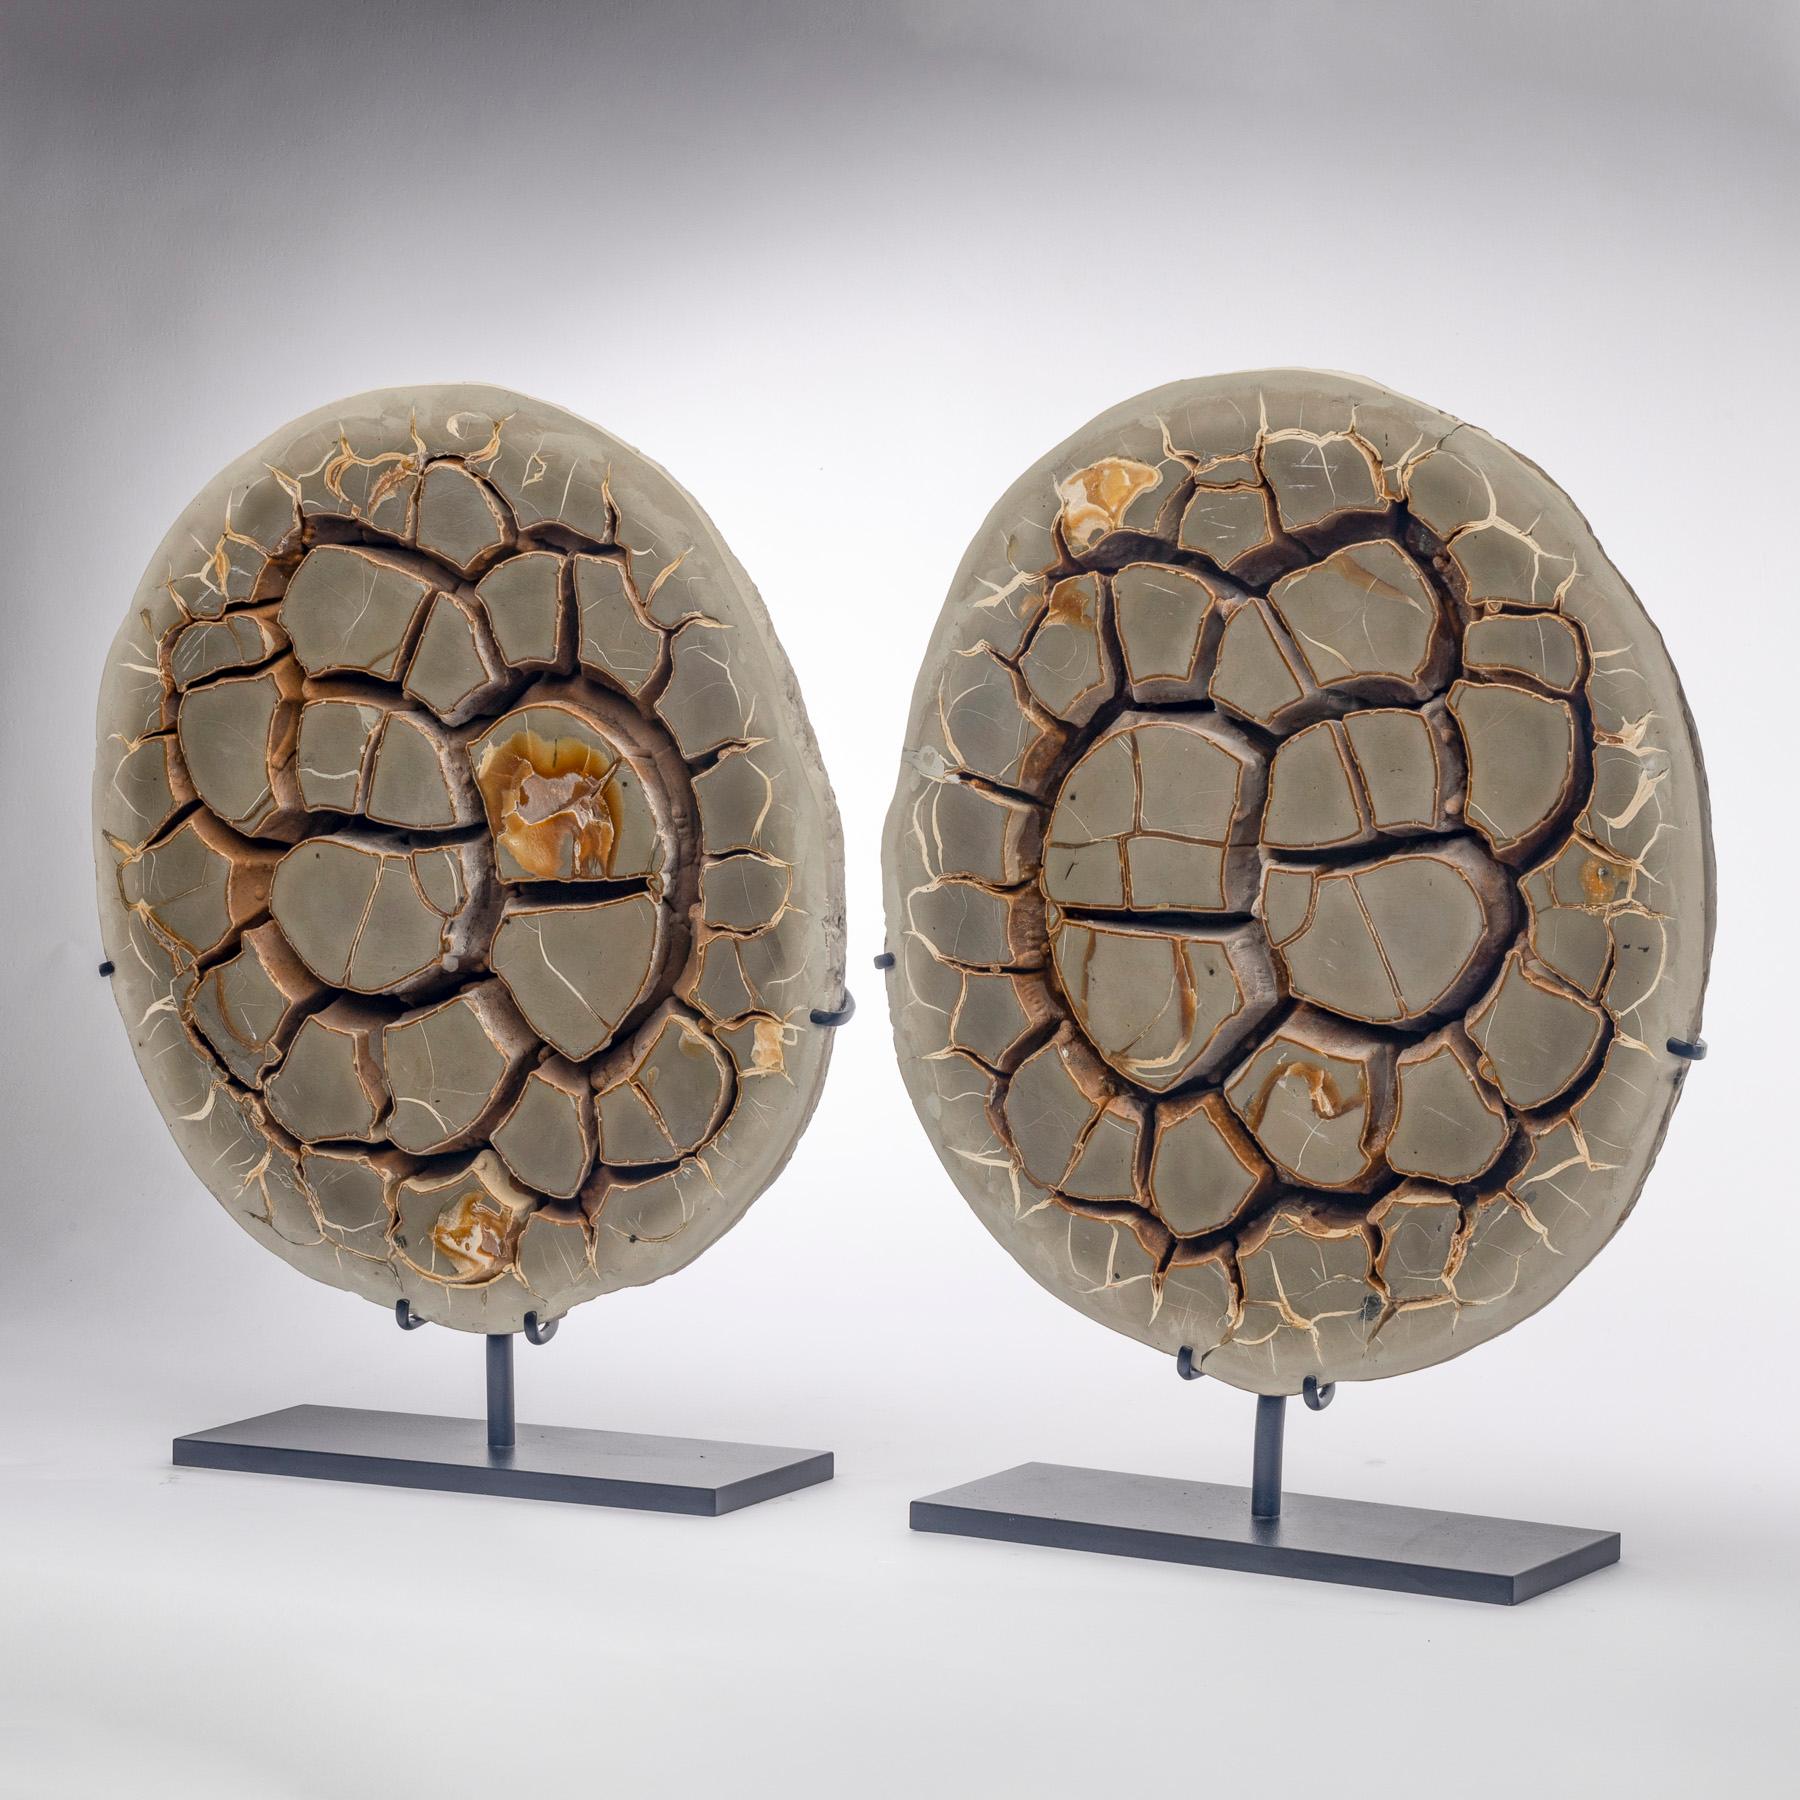 Pair of Belgium calcite Septarian nodule natural form on metallic base.

Its name comes from Latin “Septem”, meaning seven years. This is because these nodules tend to crack at 7 points in all directions, creating their distinctive pattern. As a